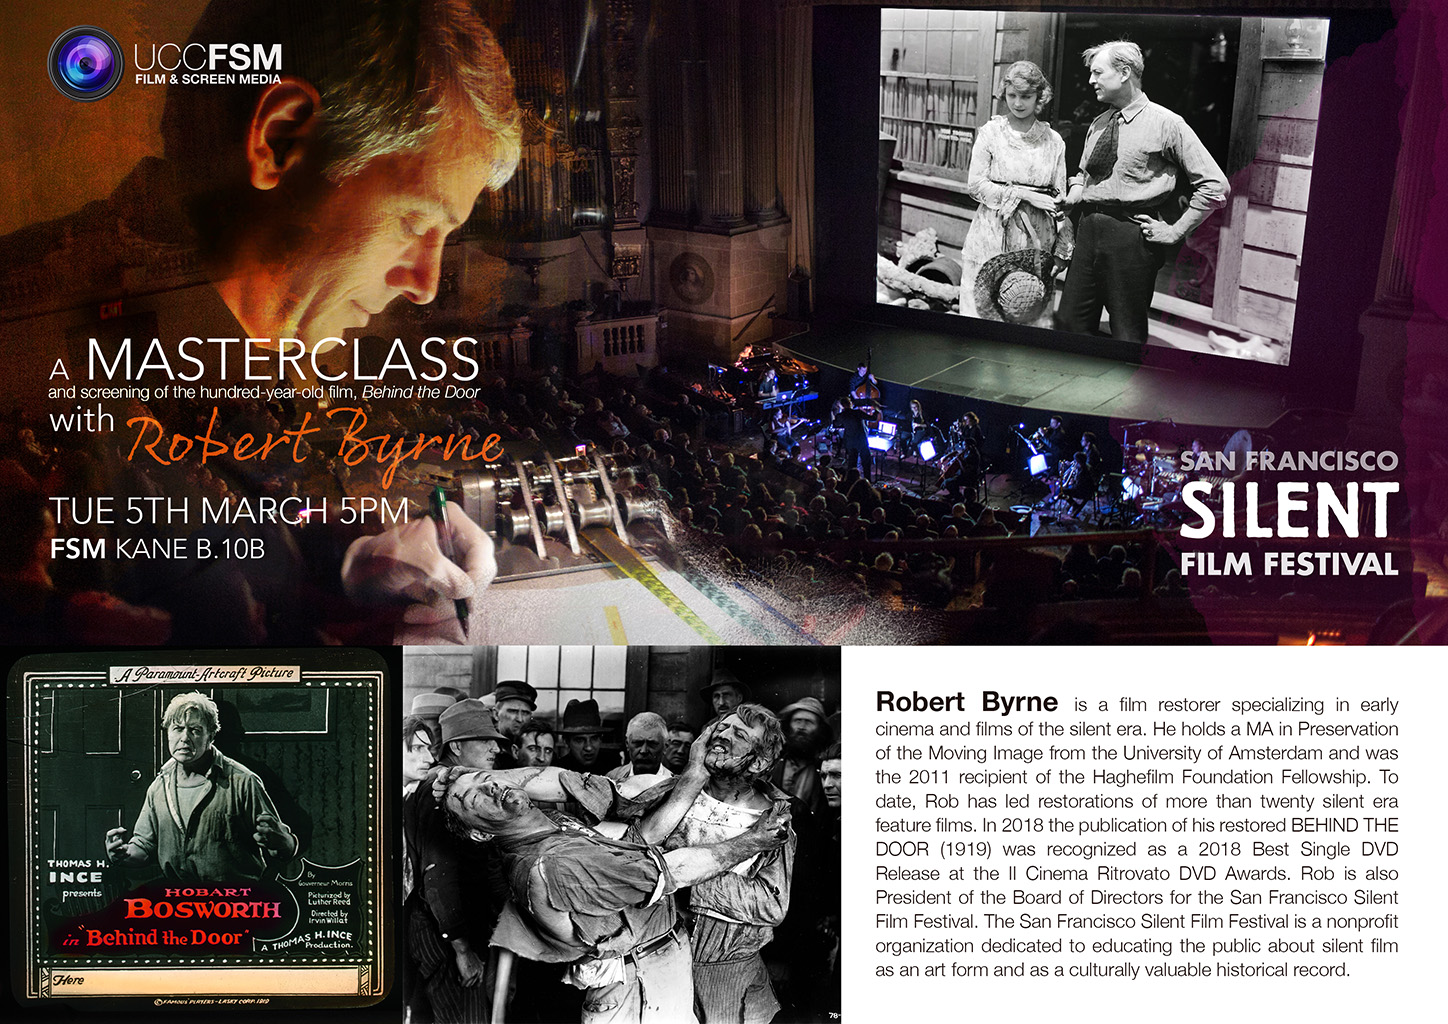 Robert Byrne Masterclass. Tues 5th March 5pm.